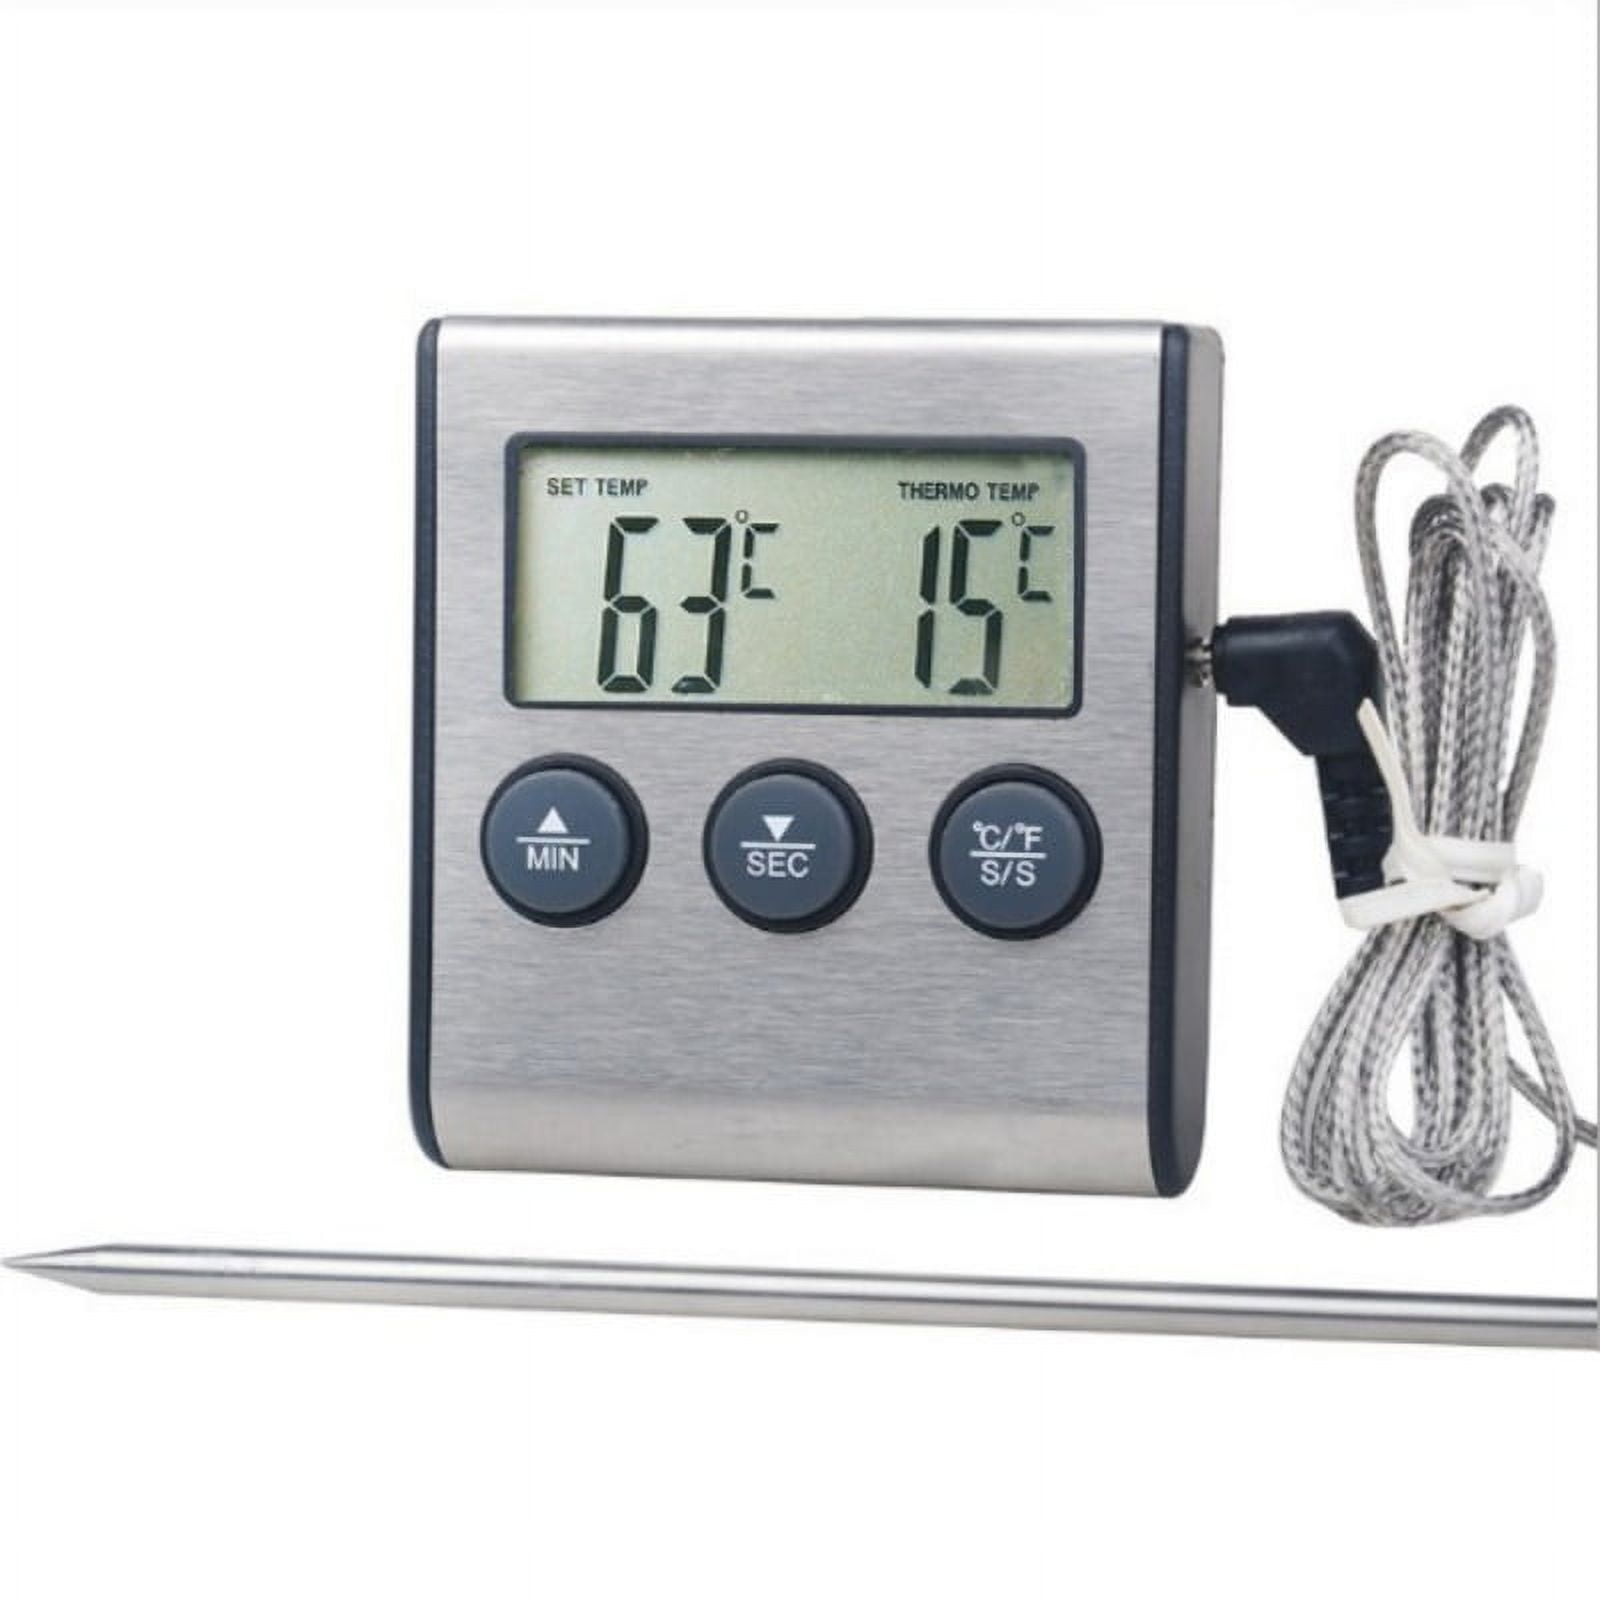 Vermon Kitchen Food Cook Baking Grilling Meat BBQ Timer Probe Digital Oven Thermometer, Size: 7, Silver